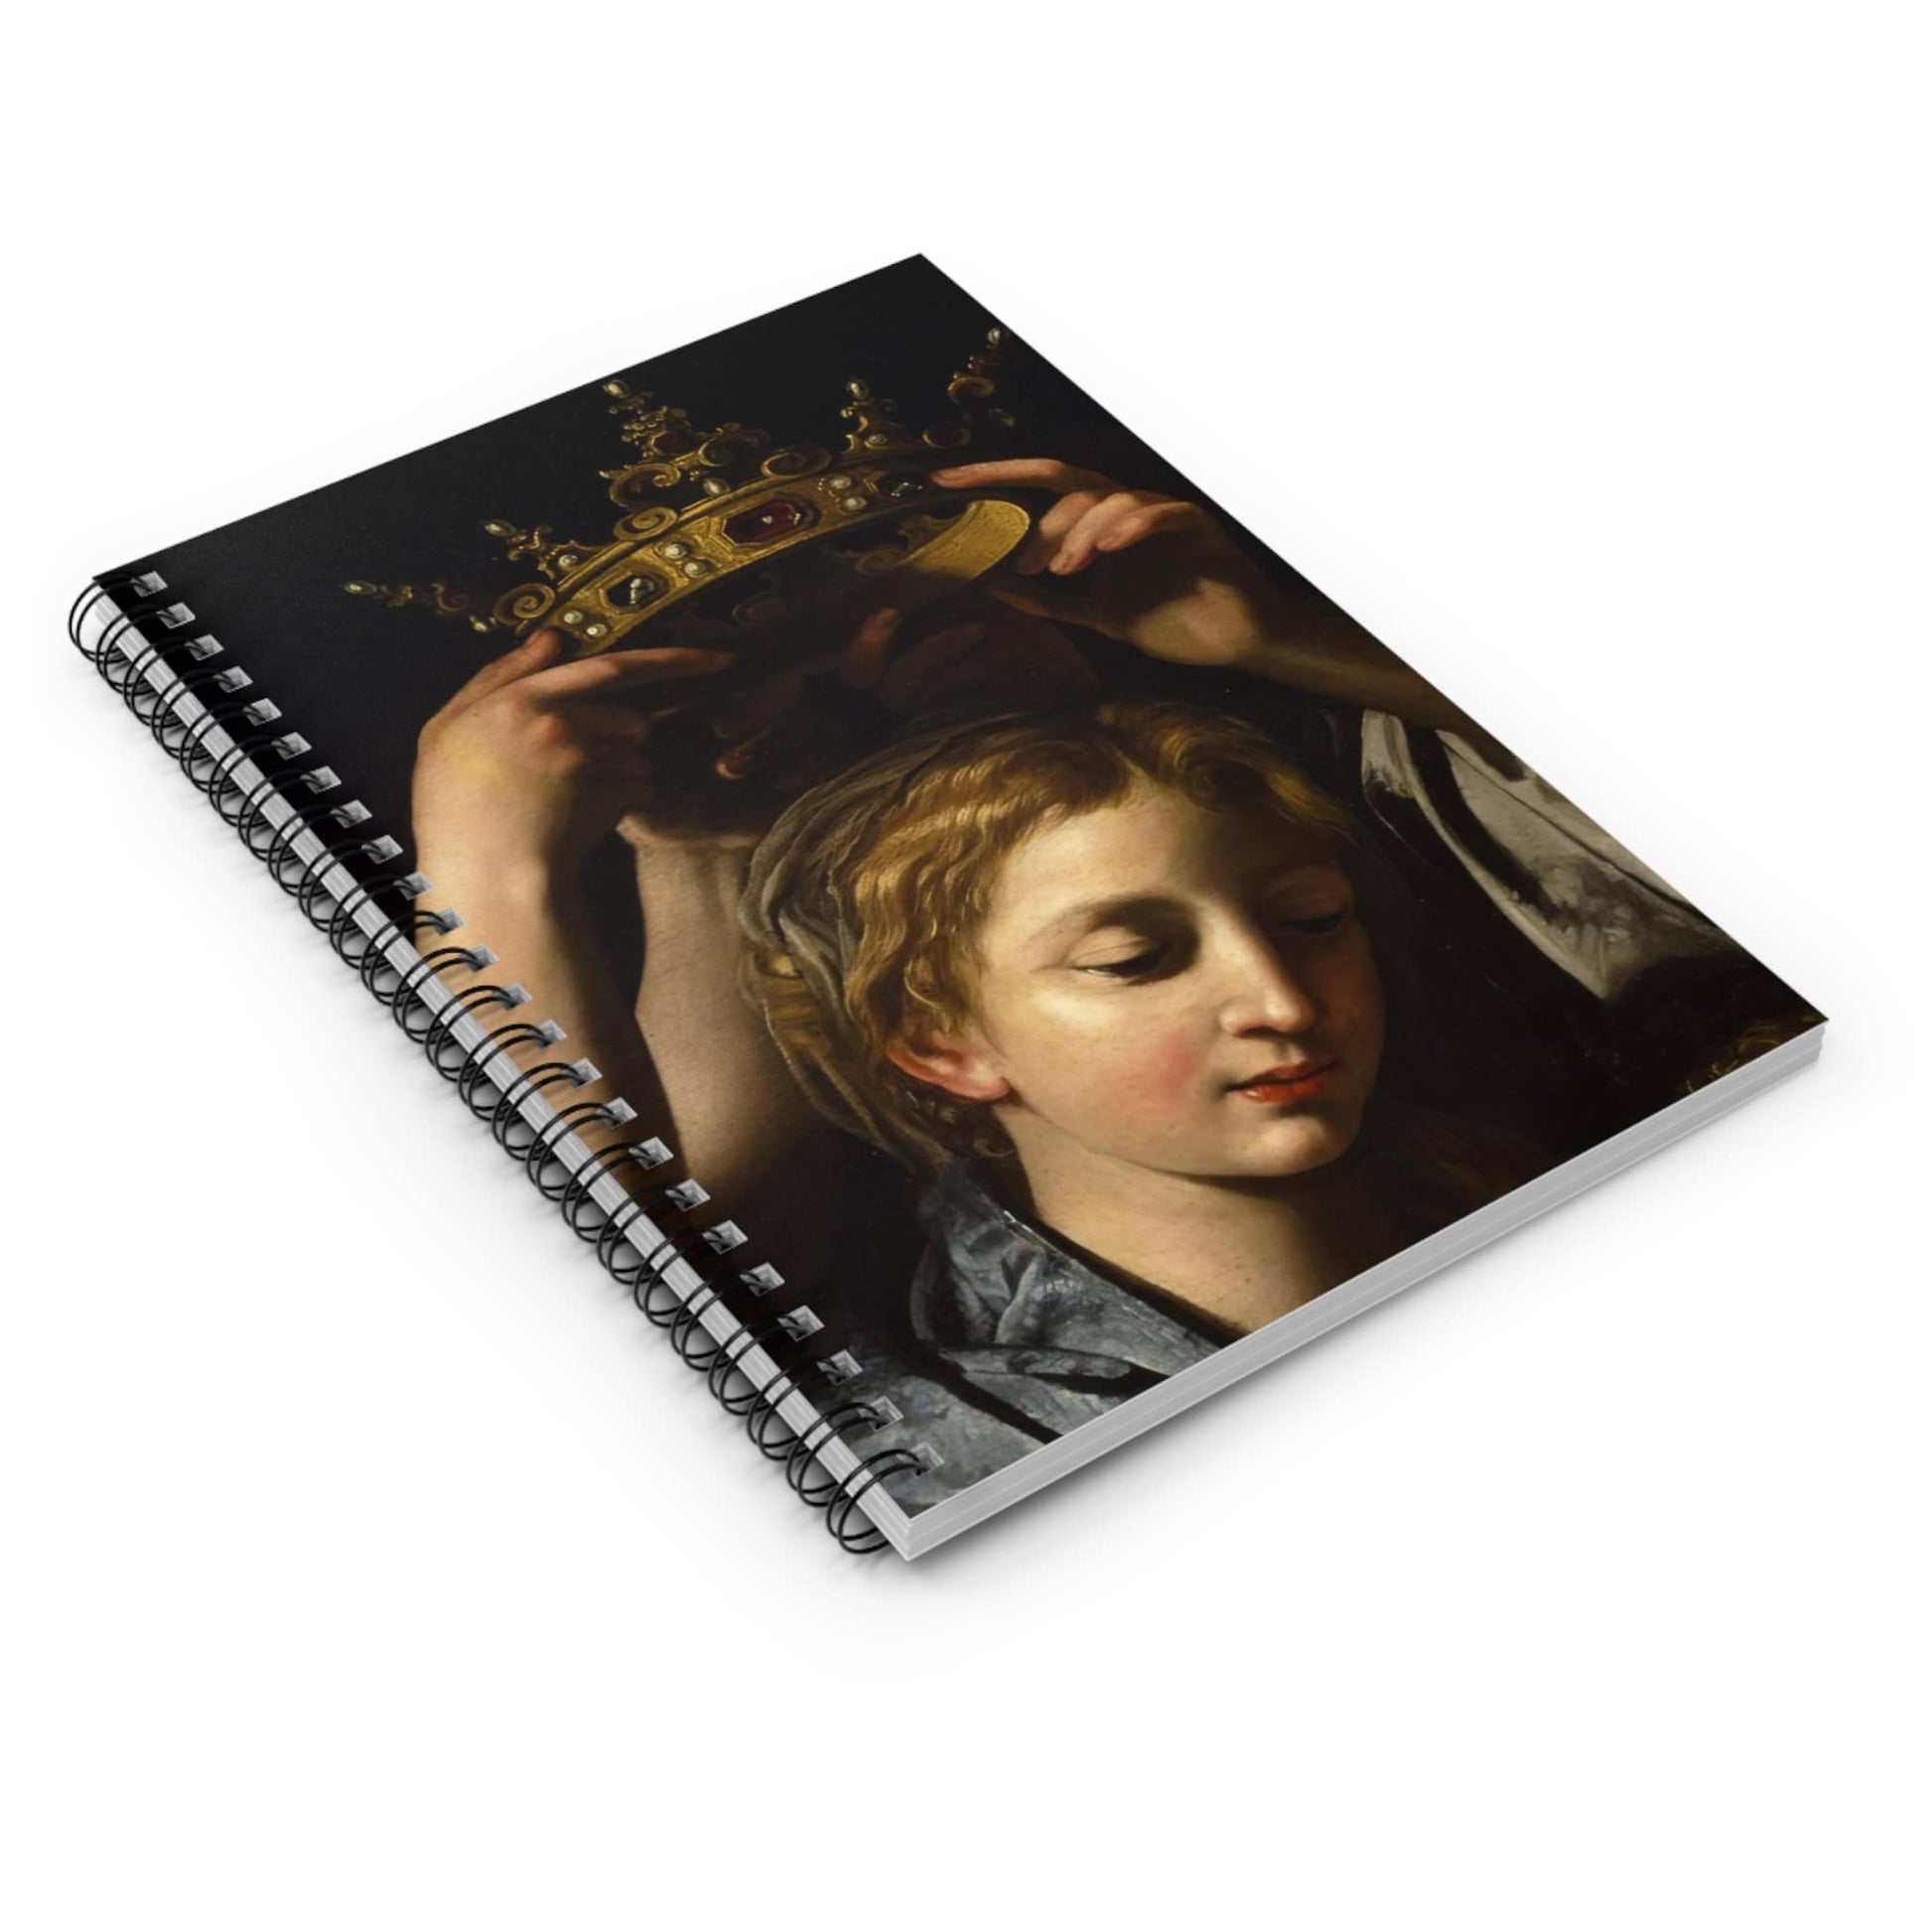 Renaissance Queen Spiral Notebook Laying Flat on White Surface